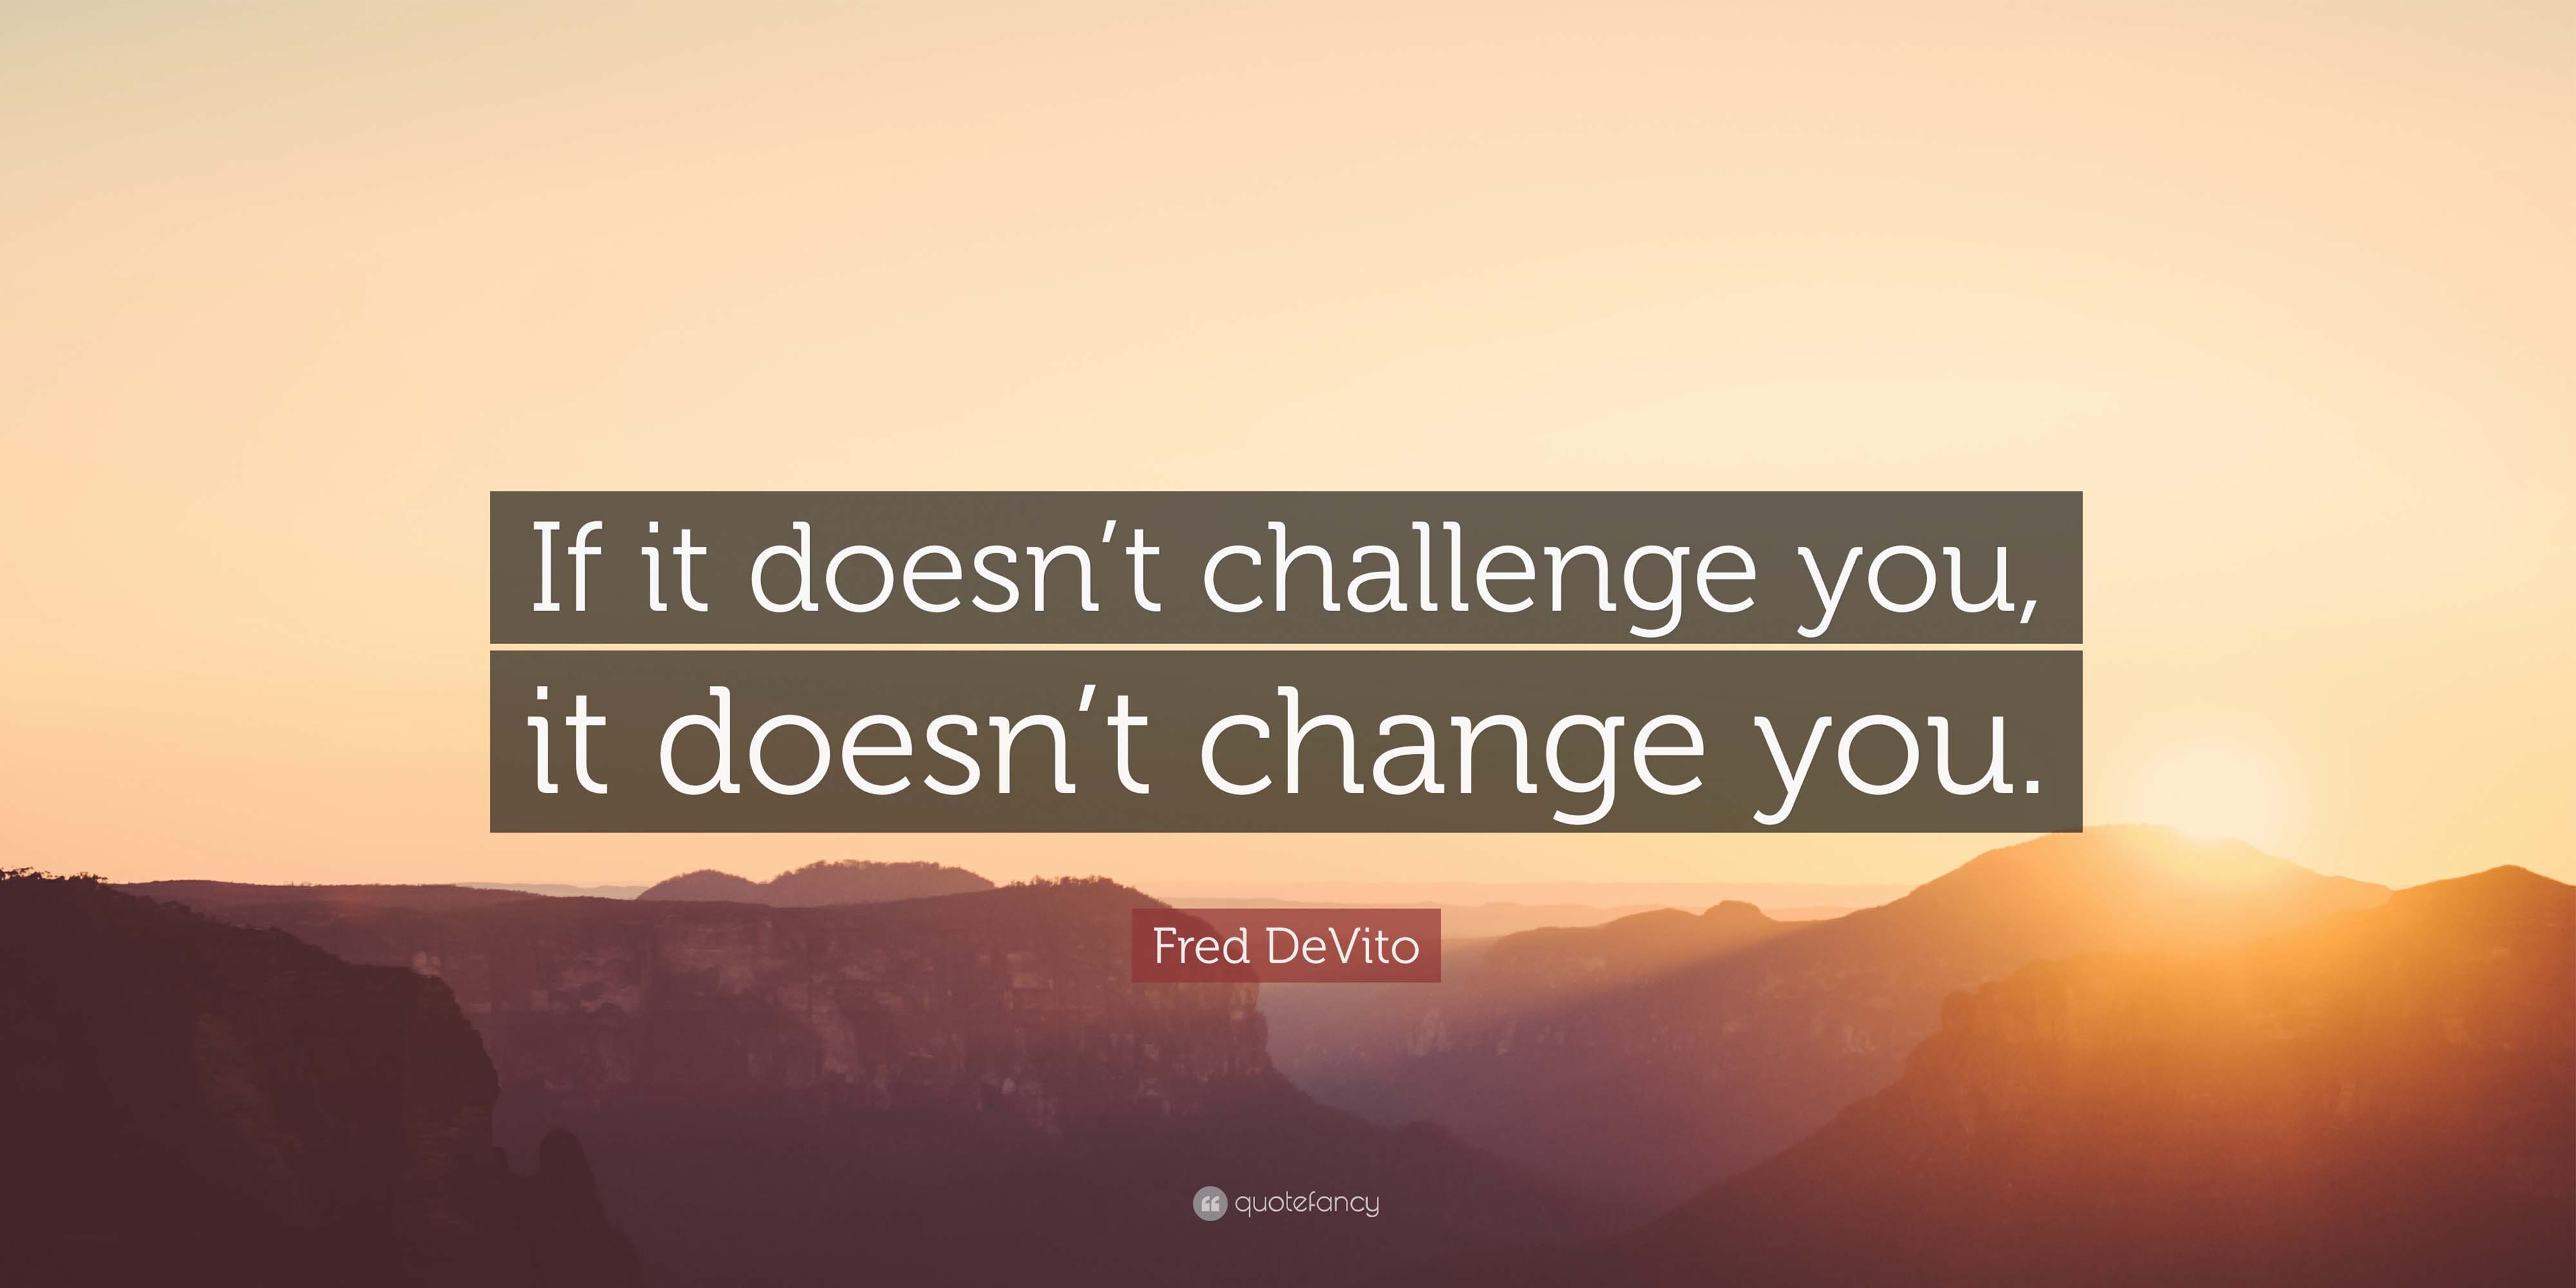 If it doesn't challenge you, it doesn't change you 